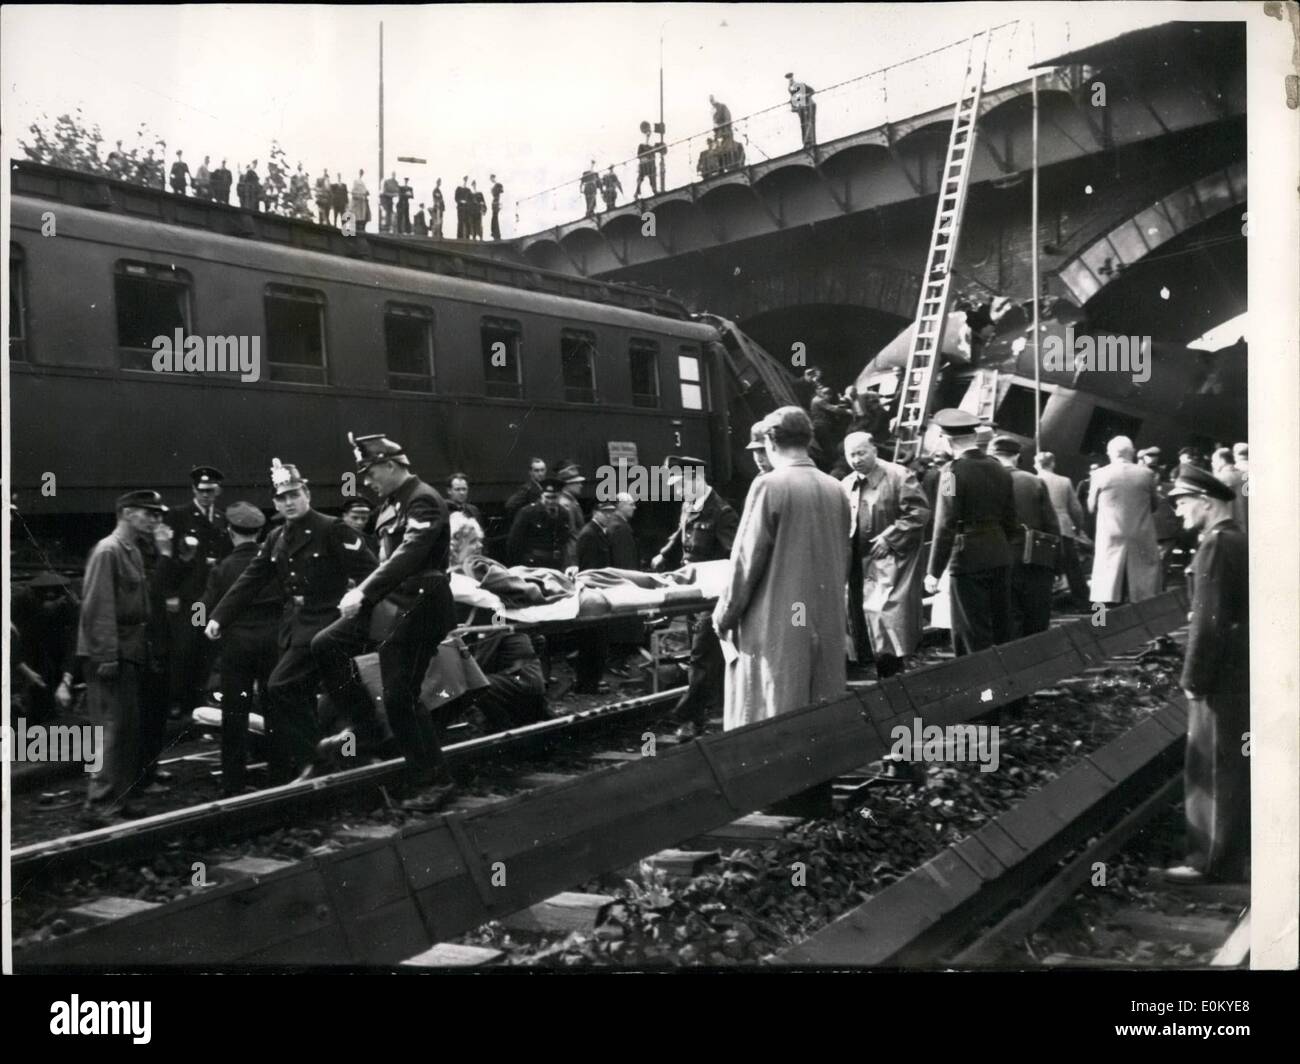 Sep. 09, 1952 - Nine Killed In Rail Crash Near Hamburg Thirty-Two Injured.. Nine passengers were killed and 32 seriously injured when an express train from Luebeck to Hamburg - was derailed near Hamburg Station... The first coach left the rails and broke into two against a bridge... Keystone Photo Shows:- The scene after the crash near Hamburg Station. Stock Photo